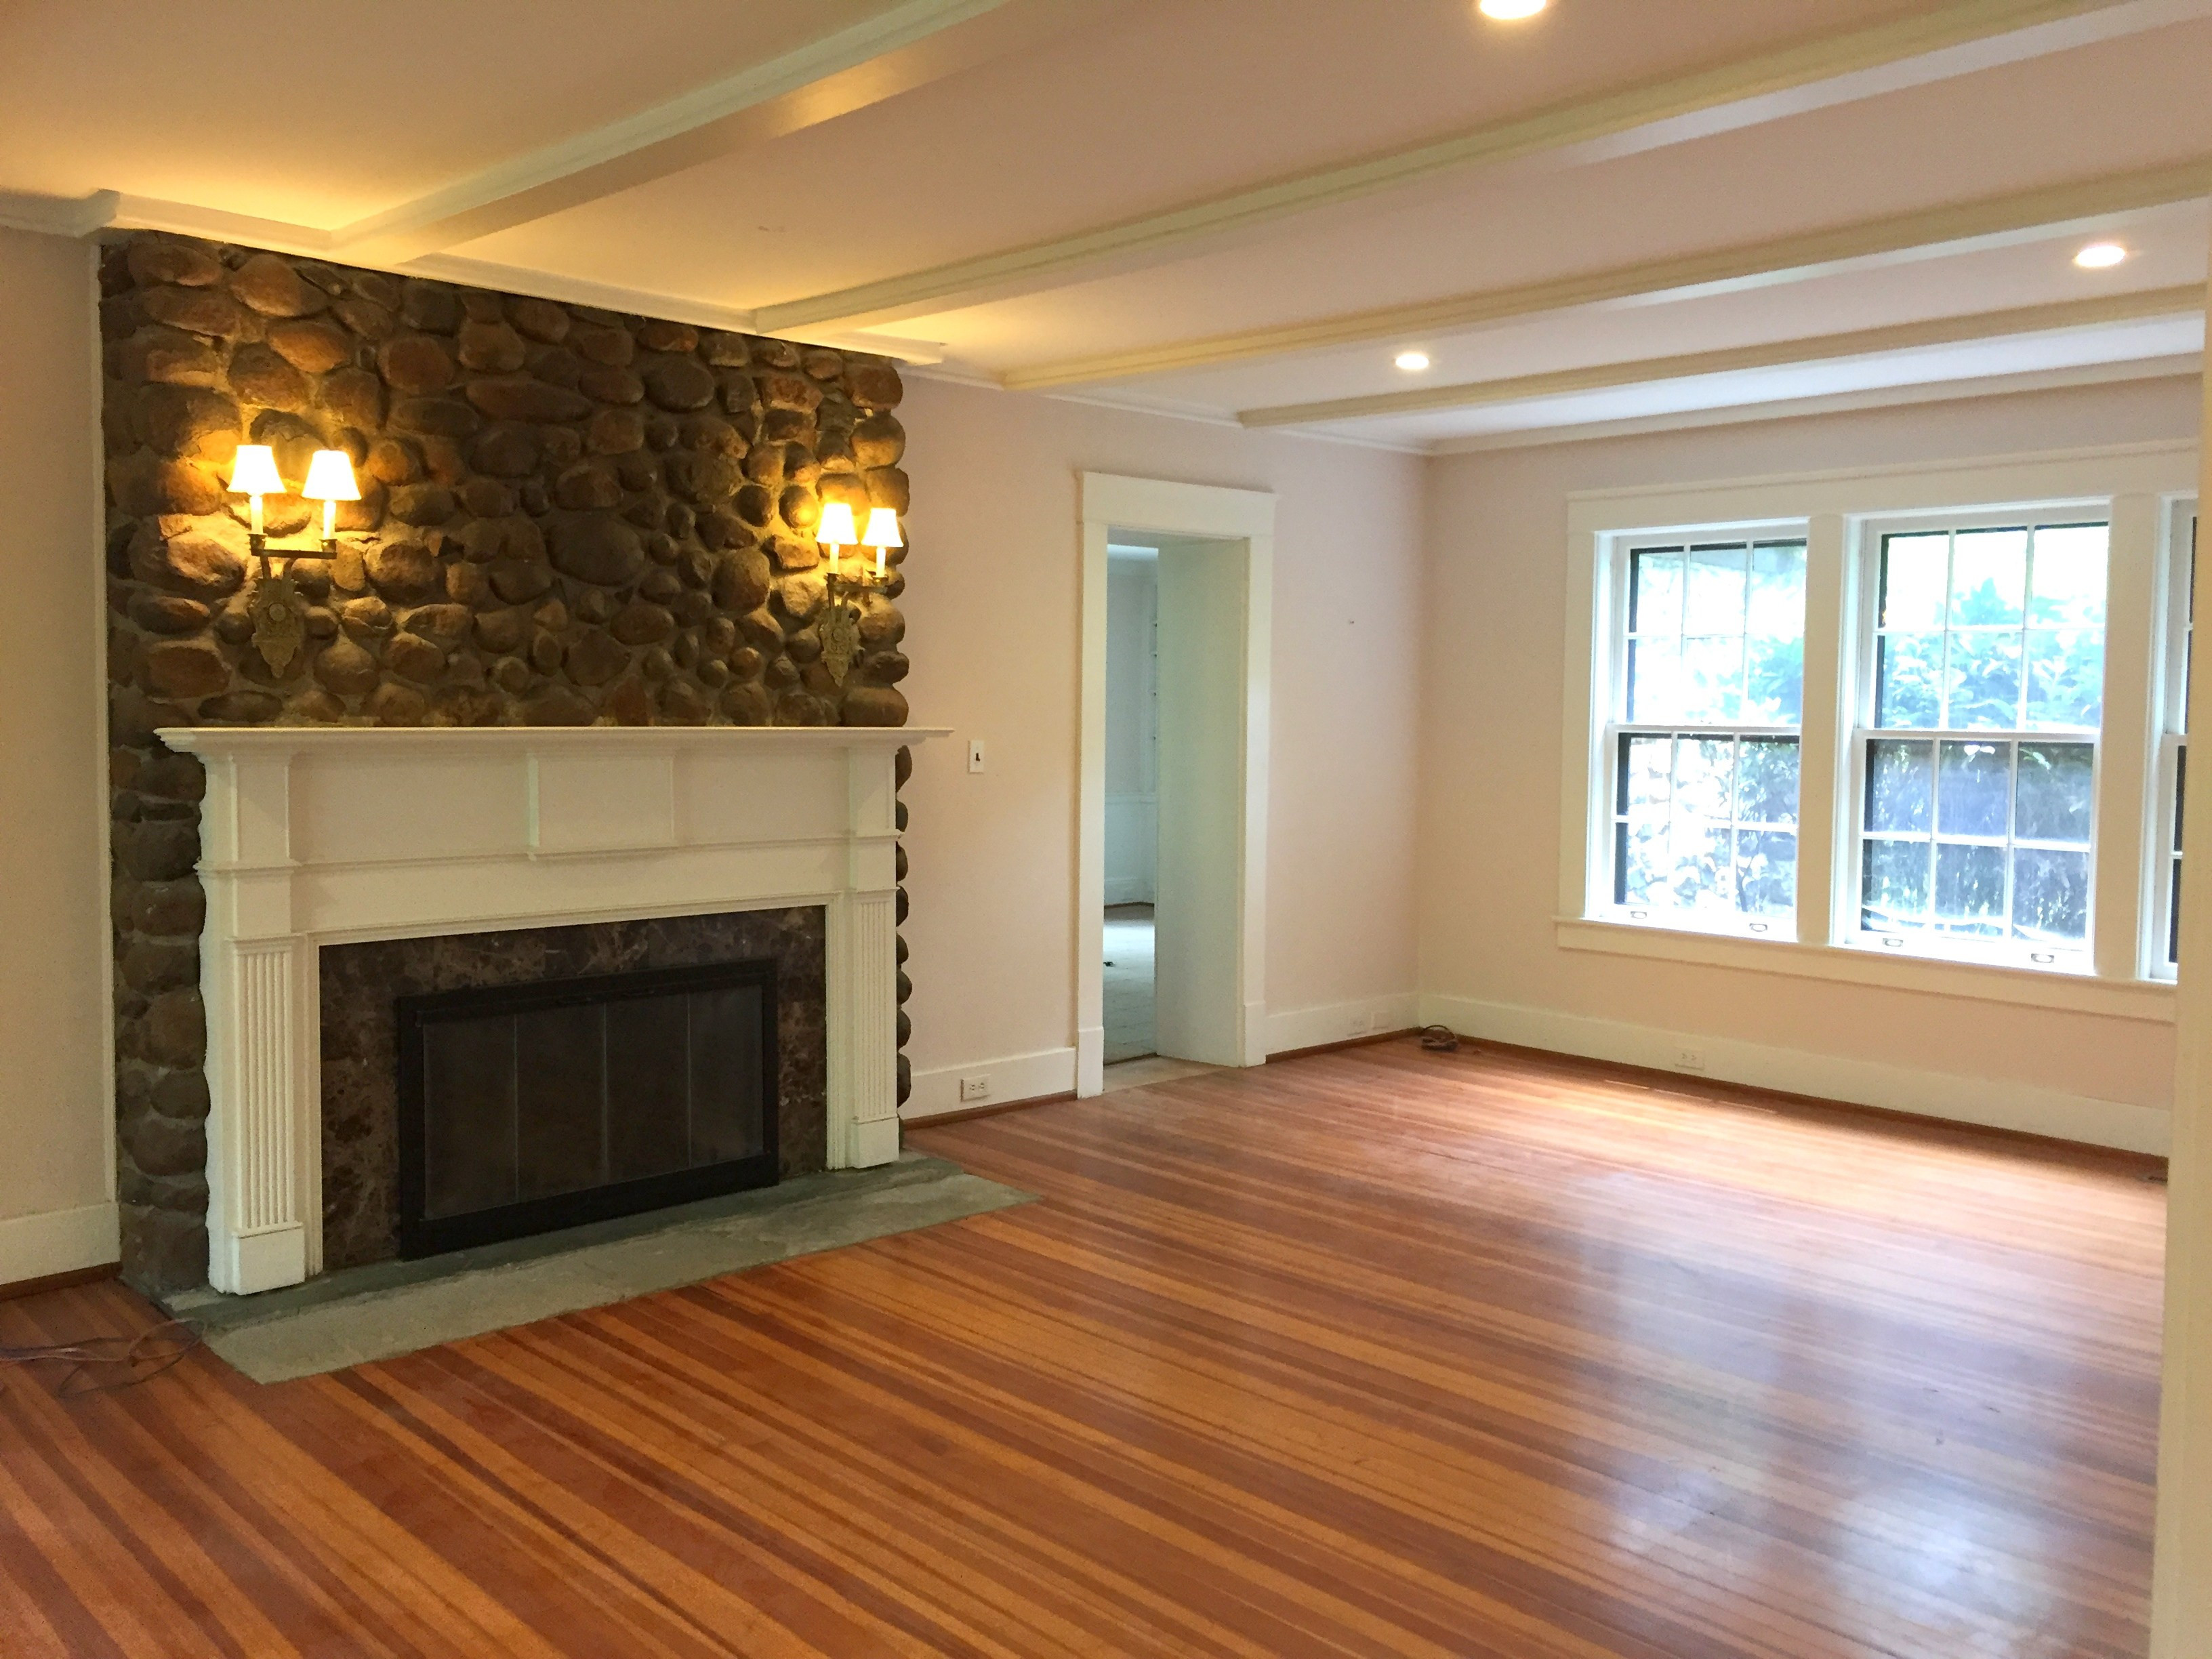 25 Amazing Hardwood Flooring Contractors Richmond Va 2024 free download hardwood flooring contractors richmond va of in sunset hills edgewood awaits next chapter preservation inside its design is attributed to greensboro architect j h hopkins the house shares se